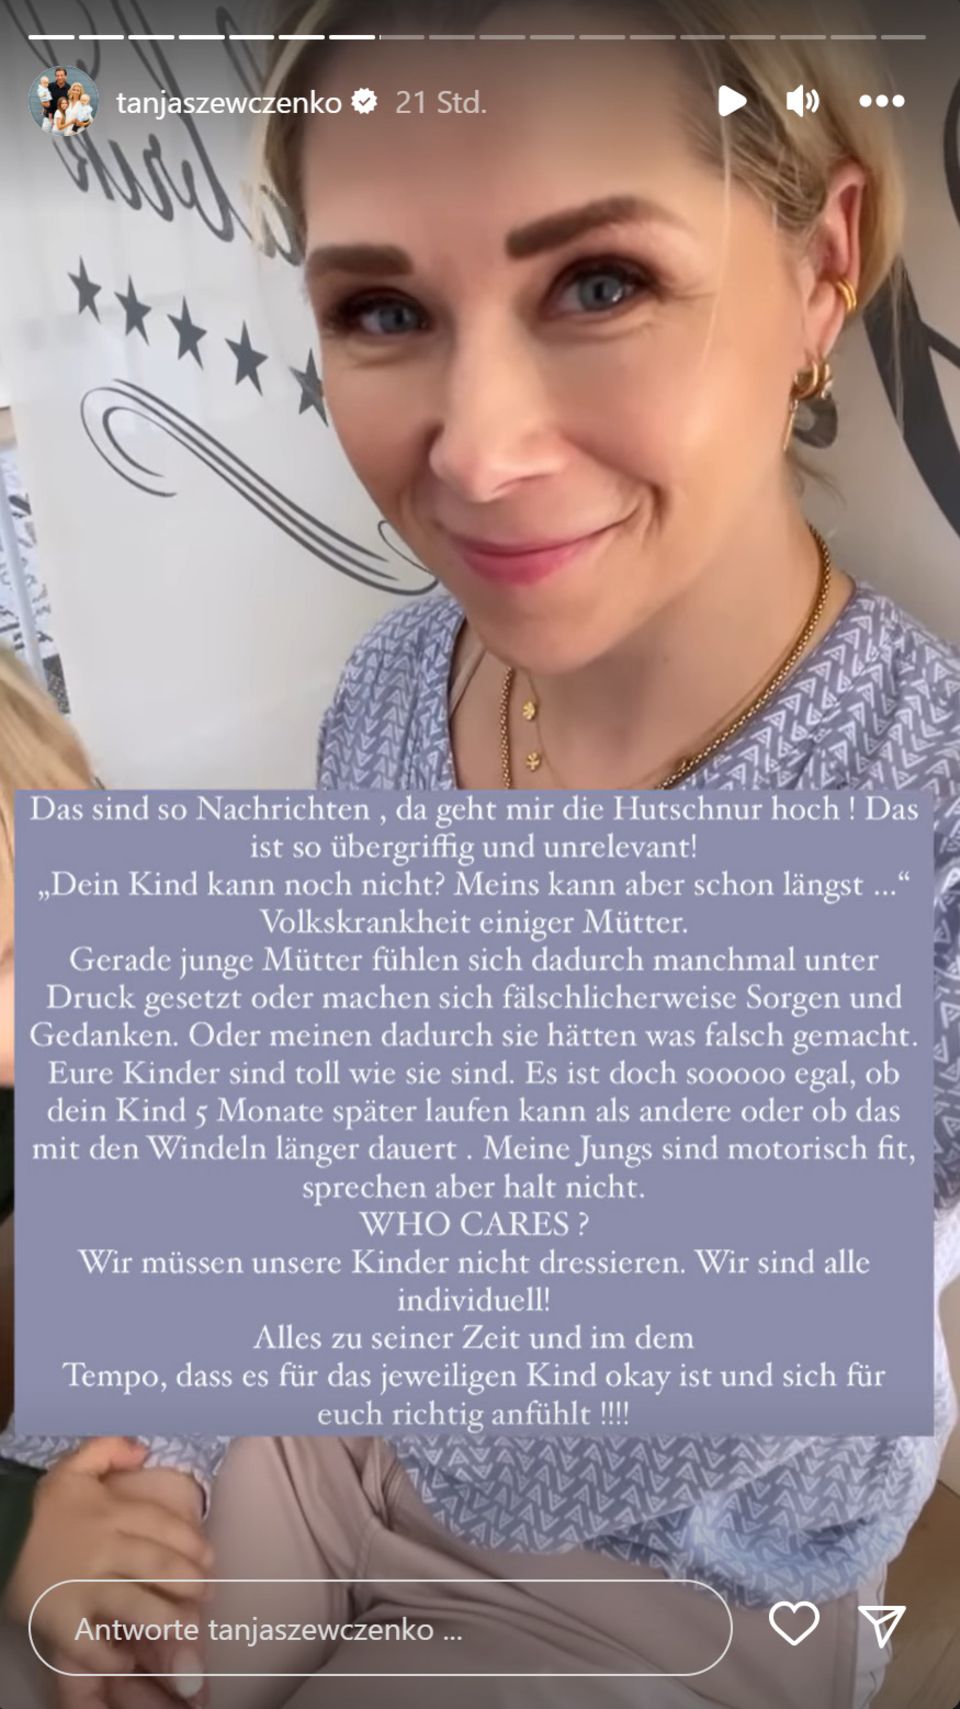 Tanja Szewczenko: "We don't have to train children!" Hearty announcement after criticism on the net